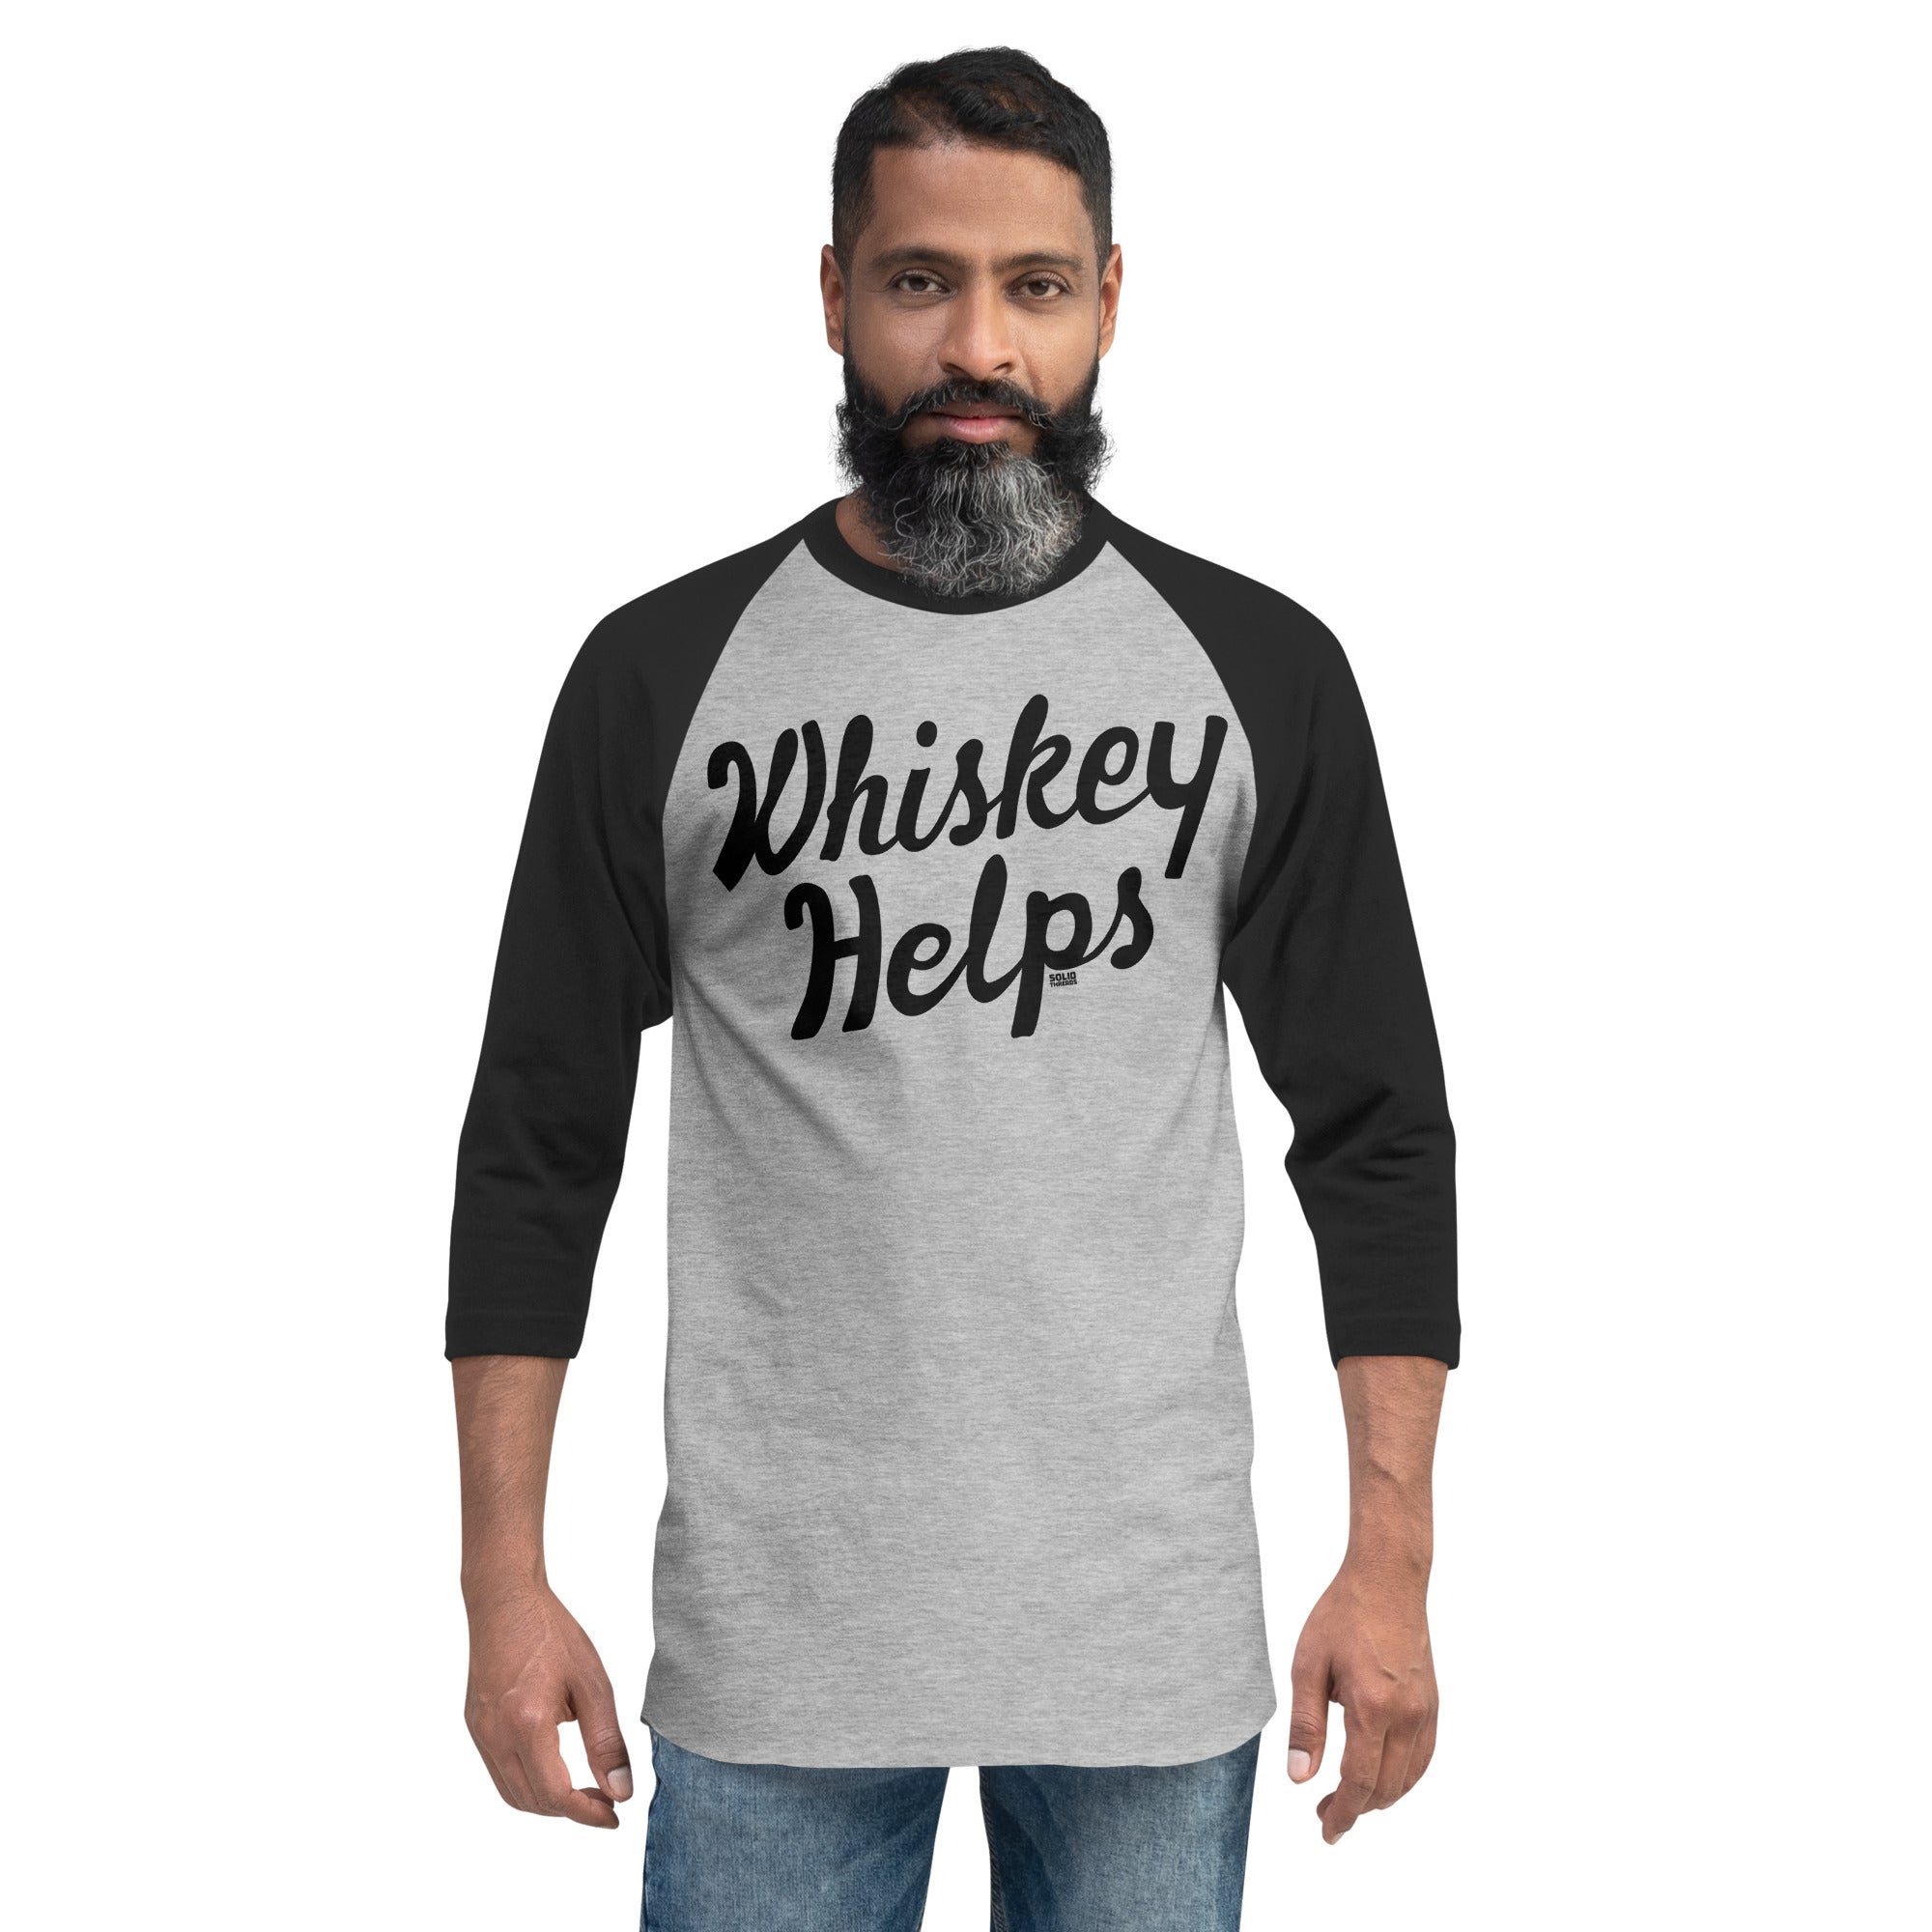 Whiskey Helps Funny Drinking Graphic Tee | Vintage Distillery Grey 3/4 Sleeve Baseball T-shirt on Model | SOLID THREADS